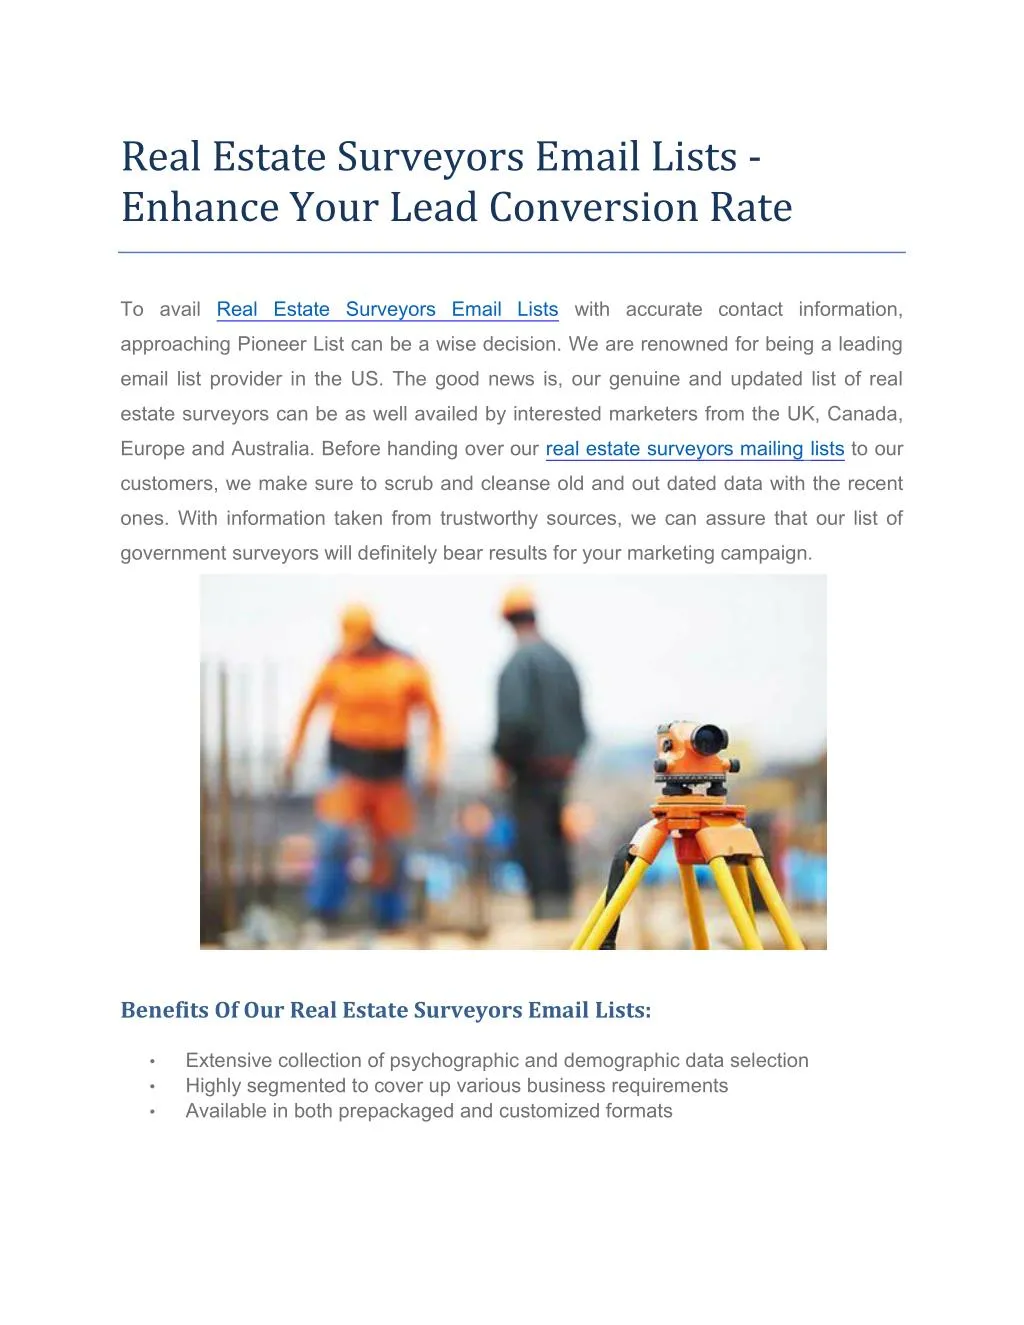 real estate surveyors email lists enhance your